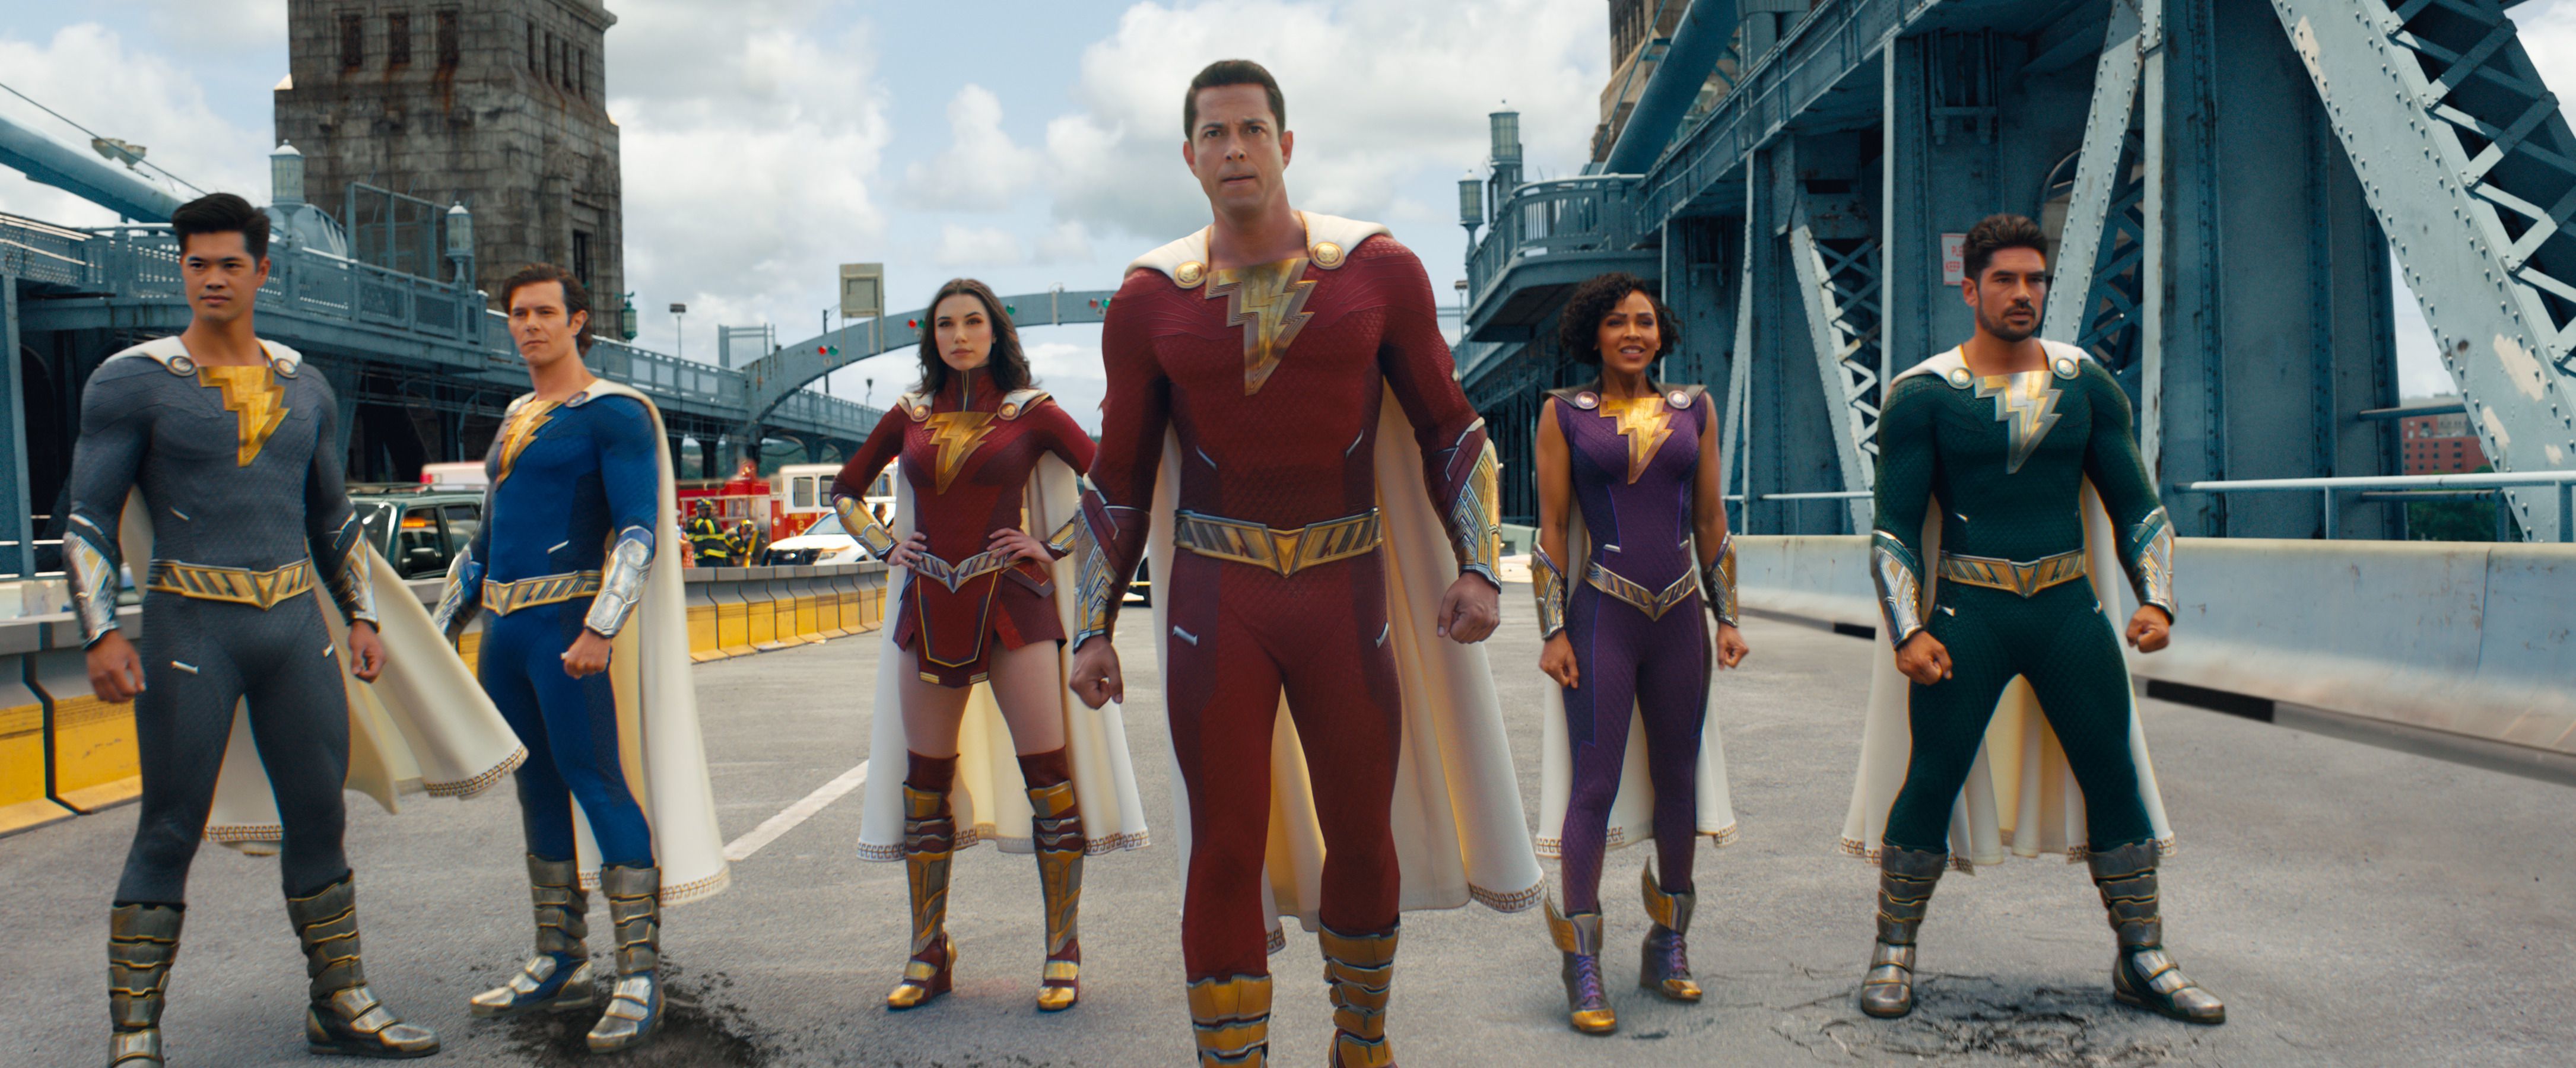 Shazam! Fury of the Gods' trailer: How much of the movie was filmed in  Philly?